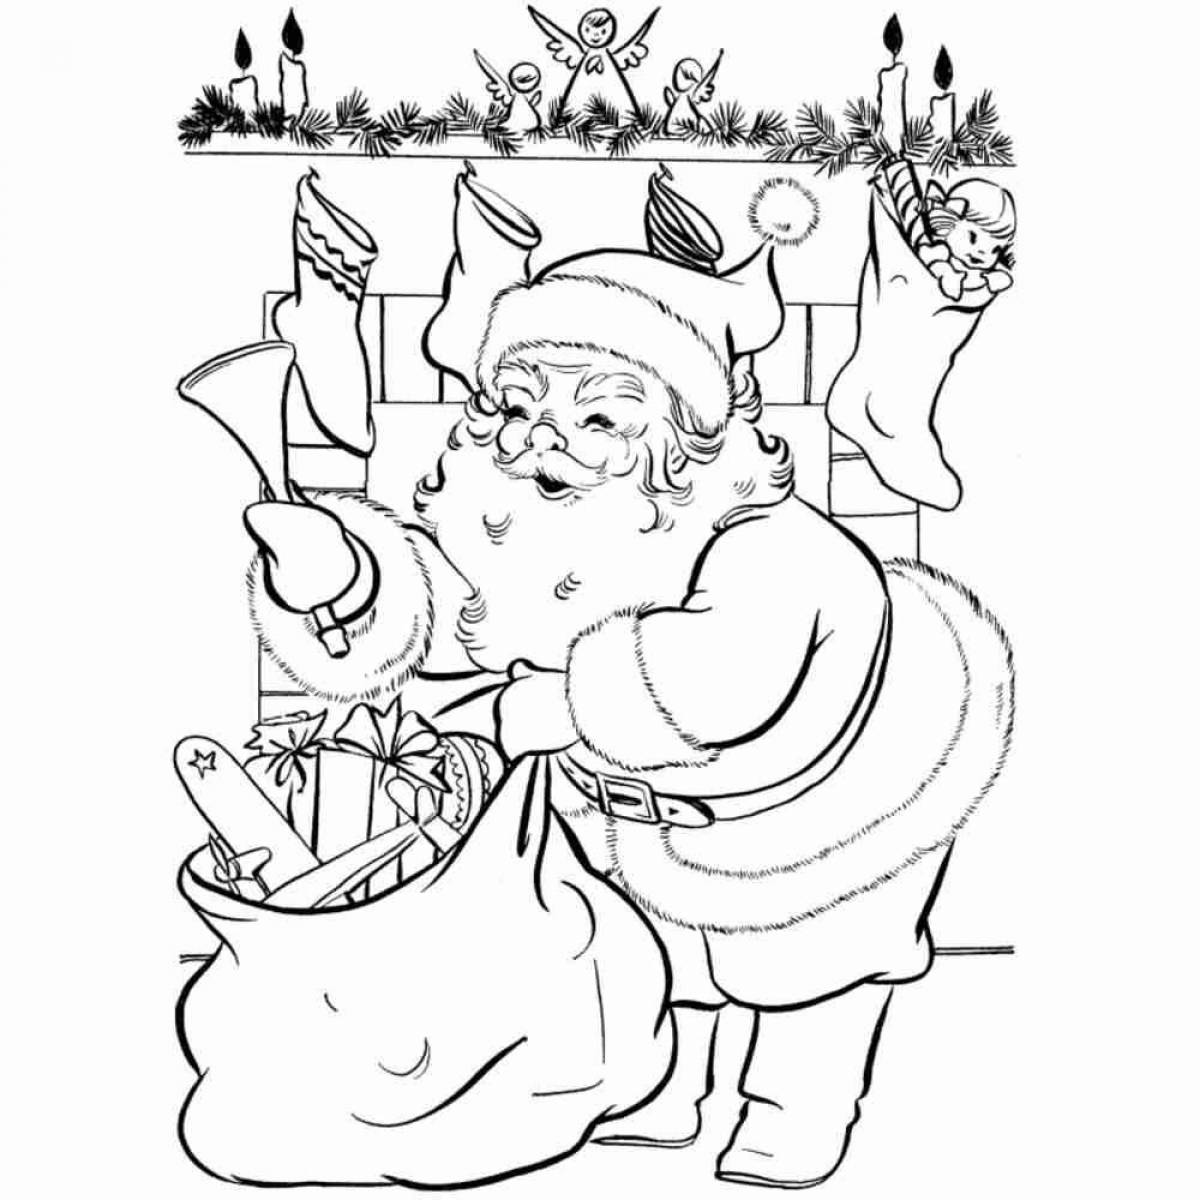 Charming santa claus coloring book for kids